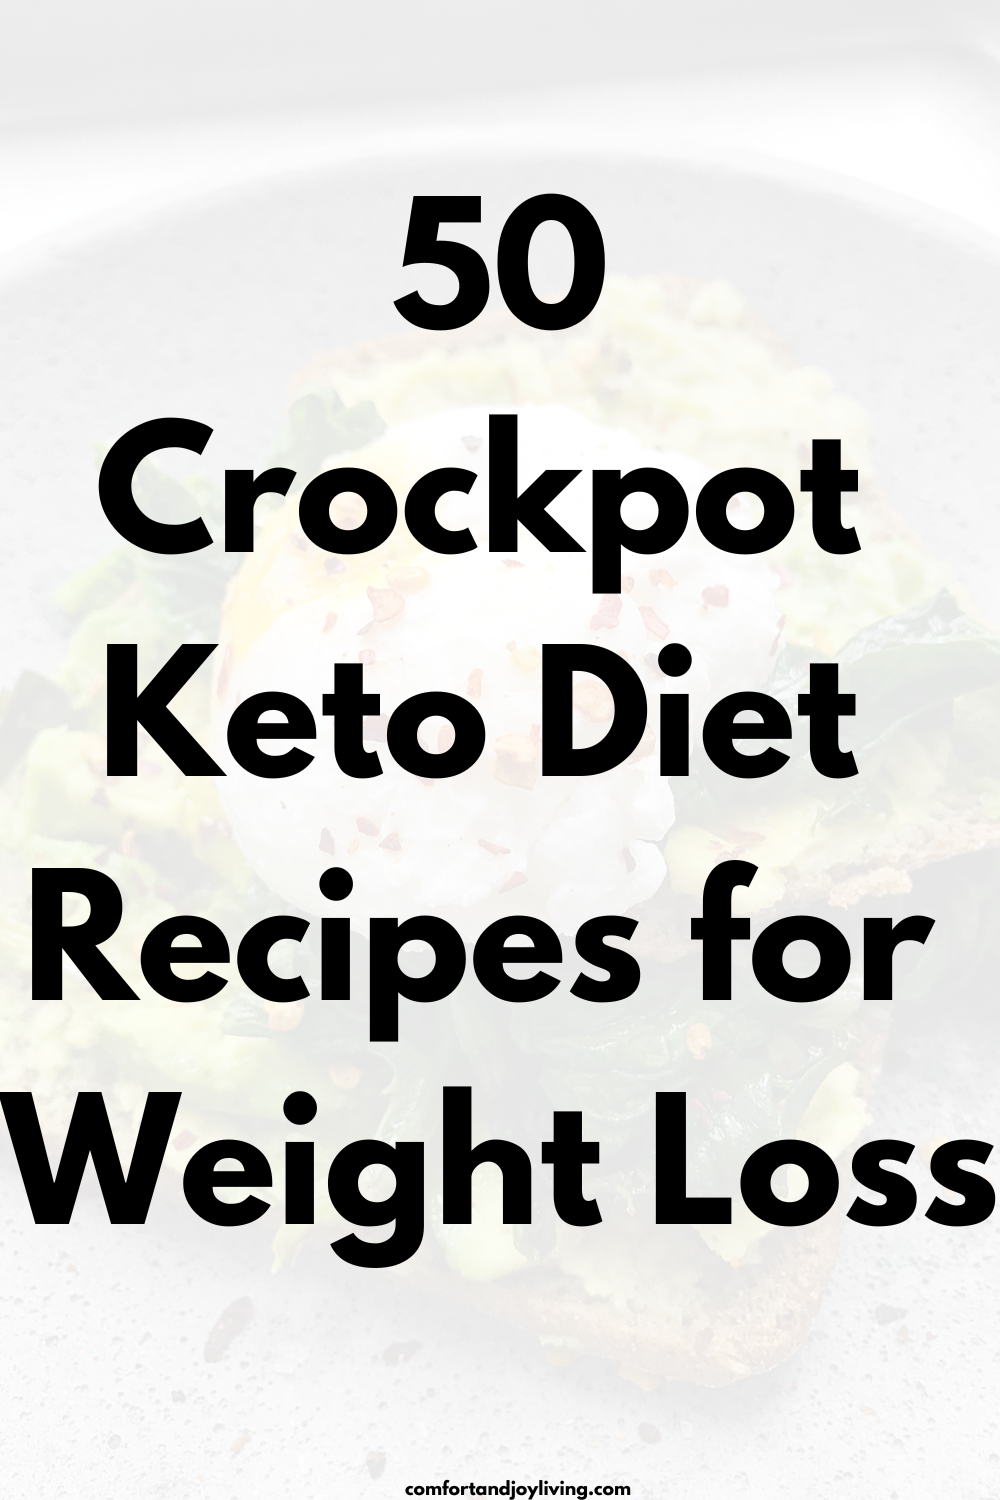 50 Crockpot Keto Diet Recipes for Weight Loss